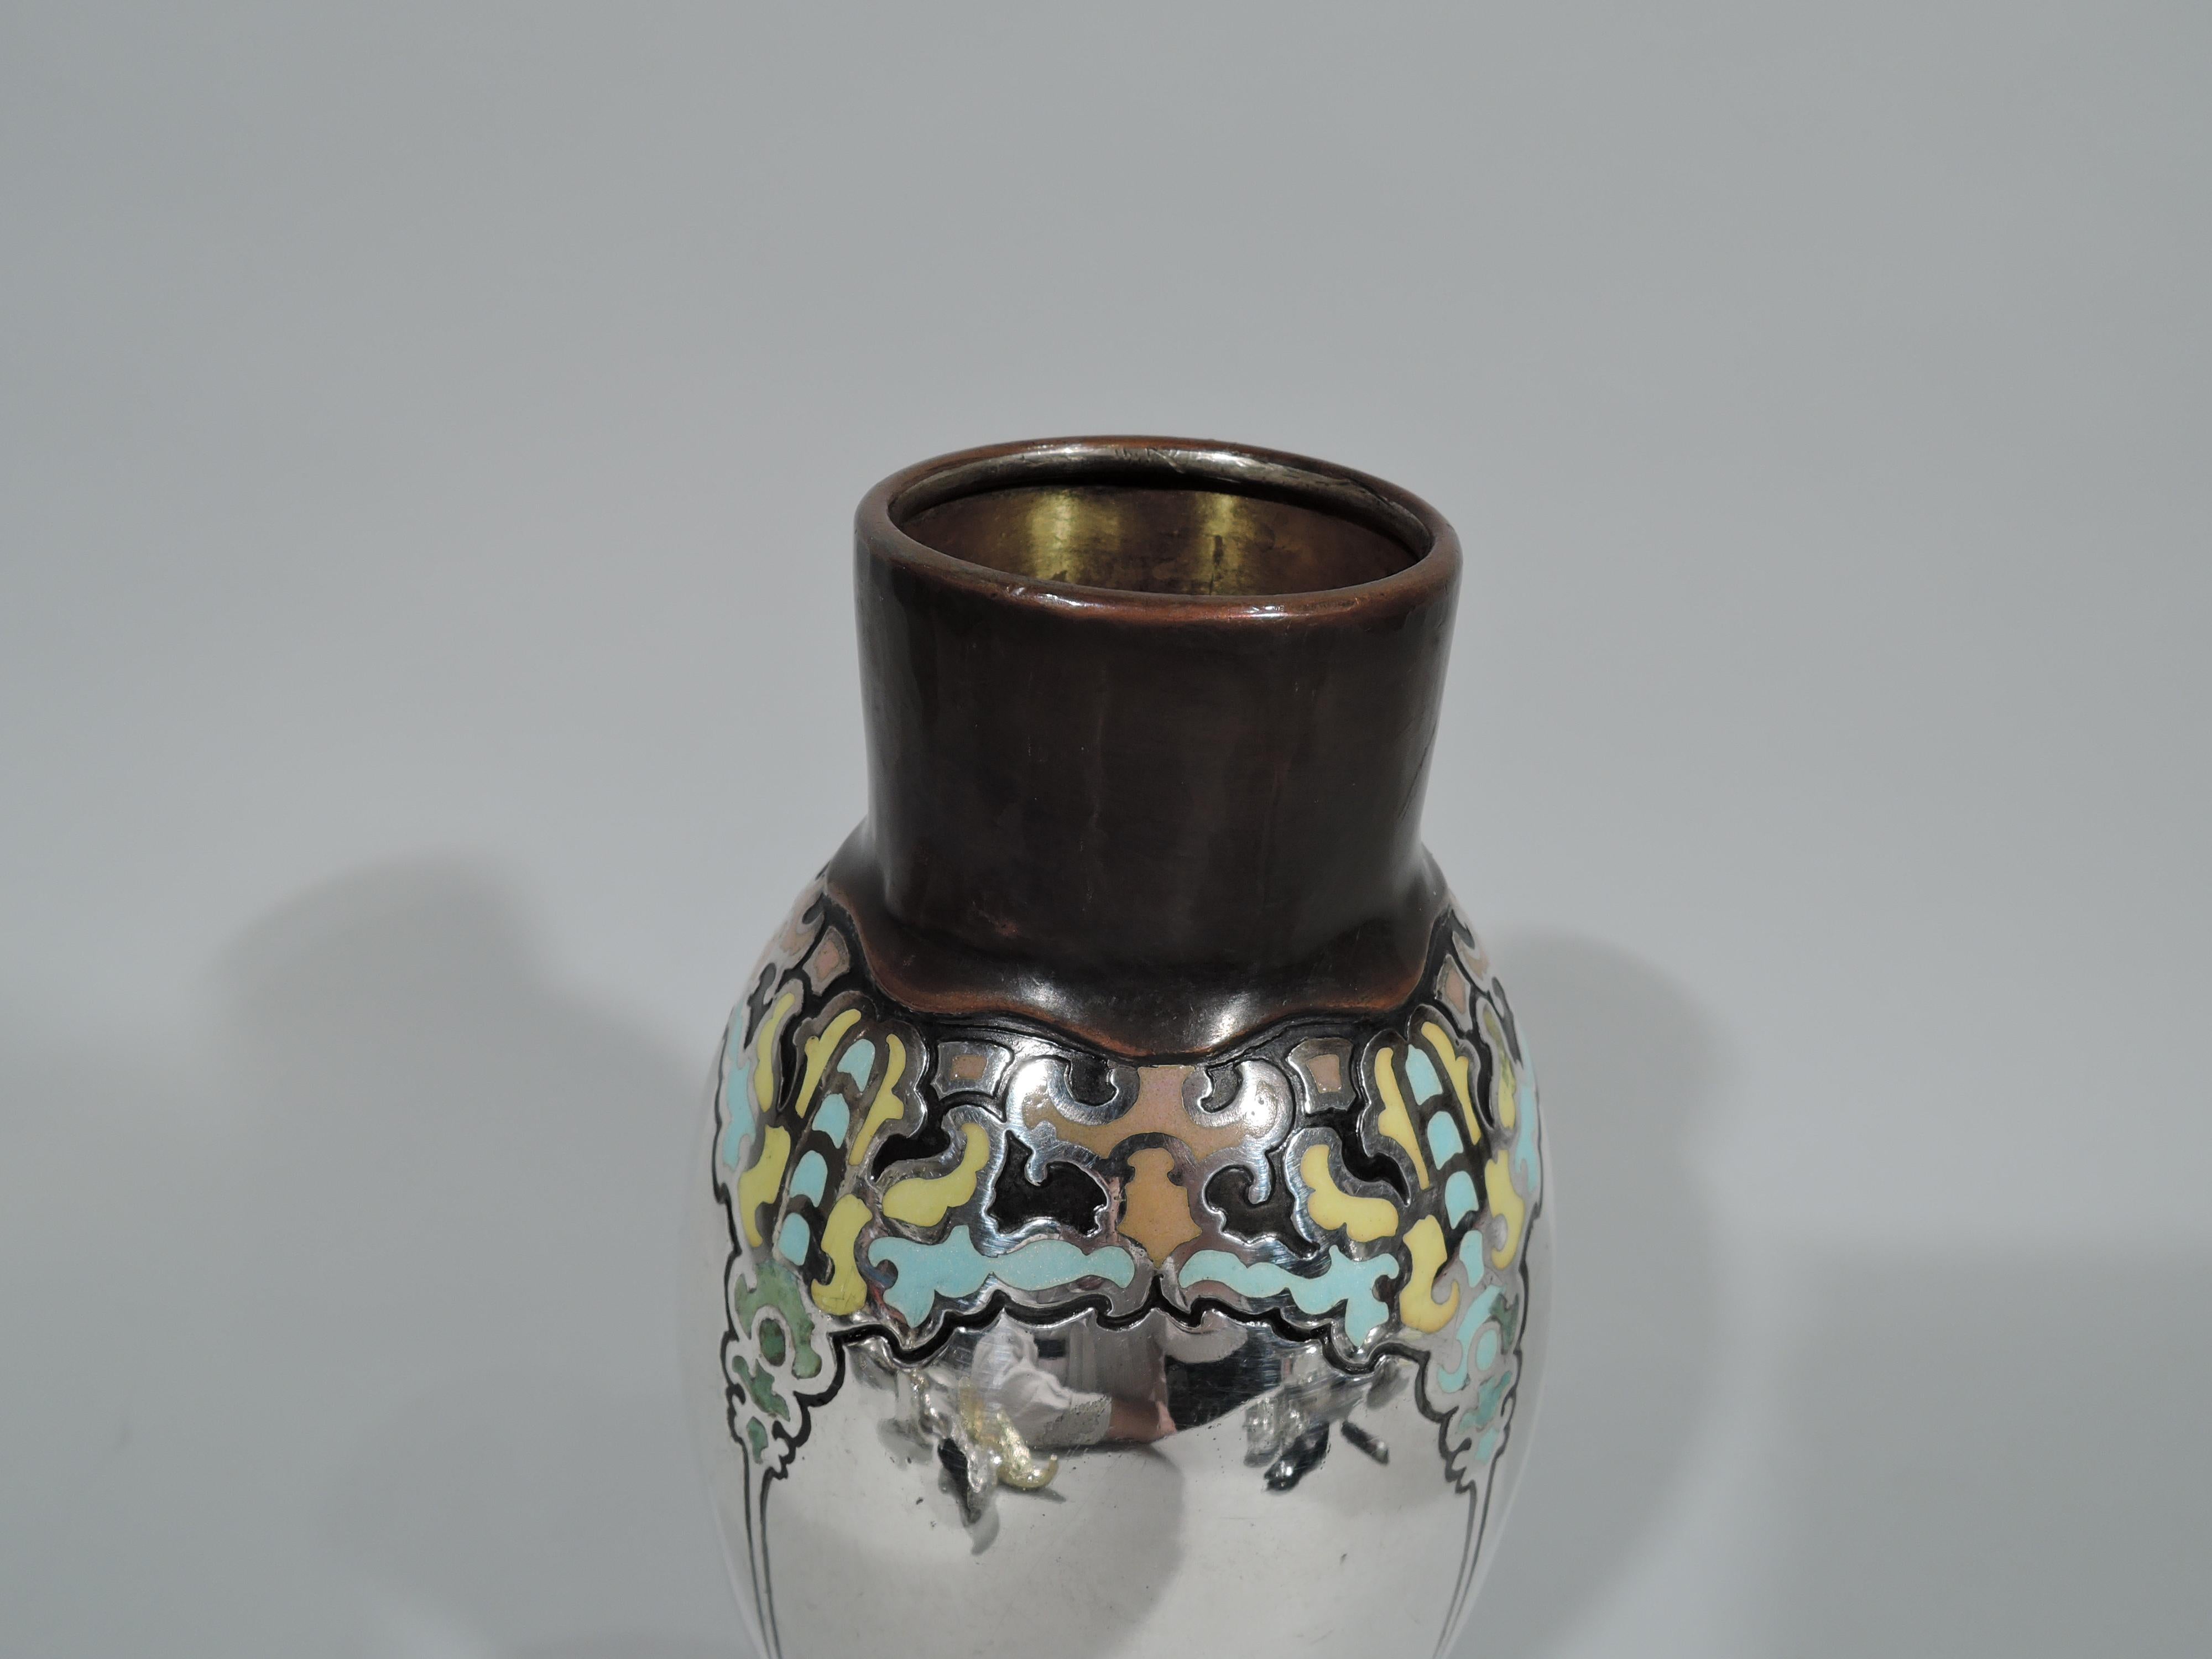 Art Nouveau mixed metal and enamel vase. Made by Tiffany & Co. in New York, circa 1910. Sterling silver baluster enameled with ornamental frames. Copper base engraved with dense and fluid fretwork bands. Copper neck with fluid “drip” mount. A